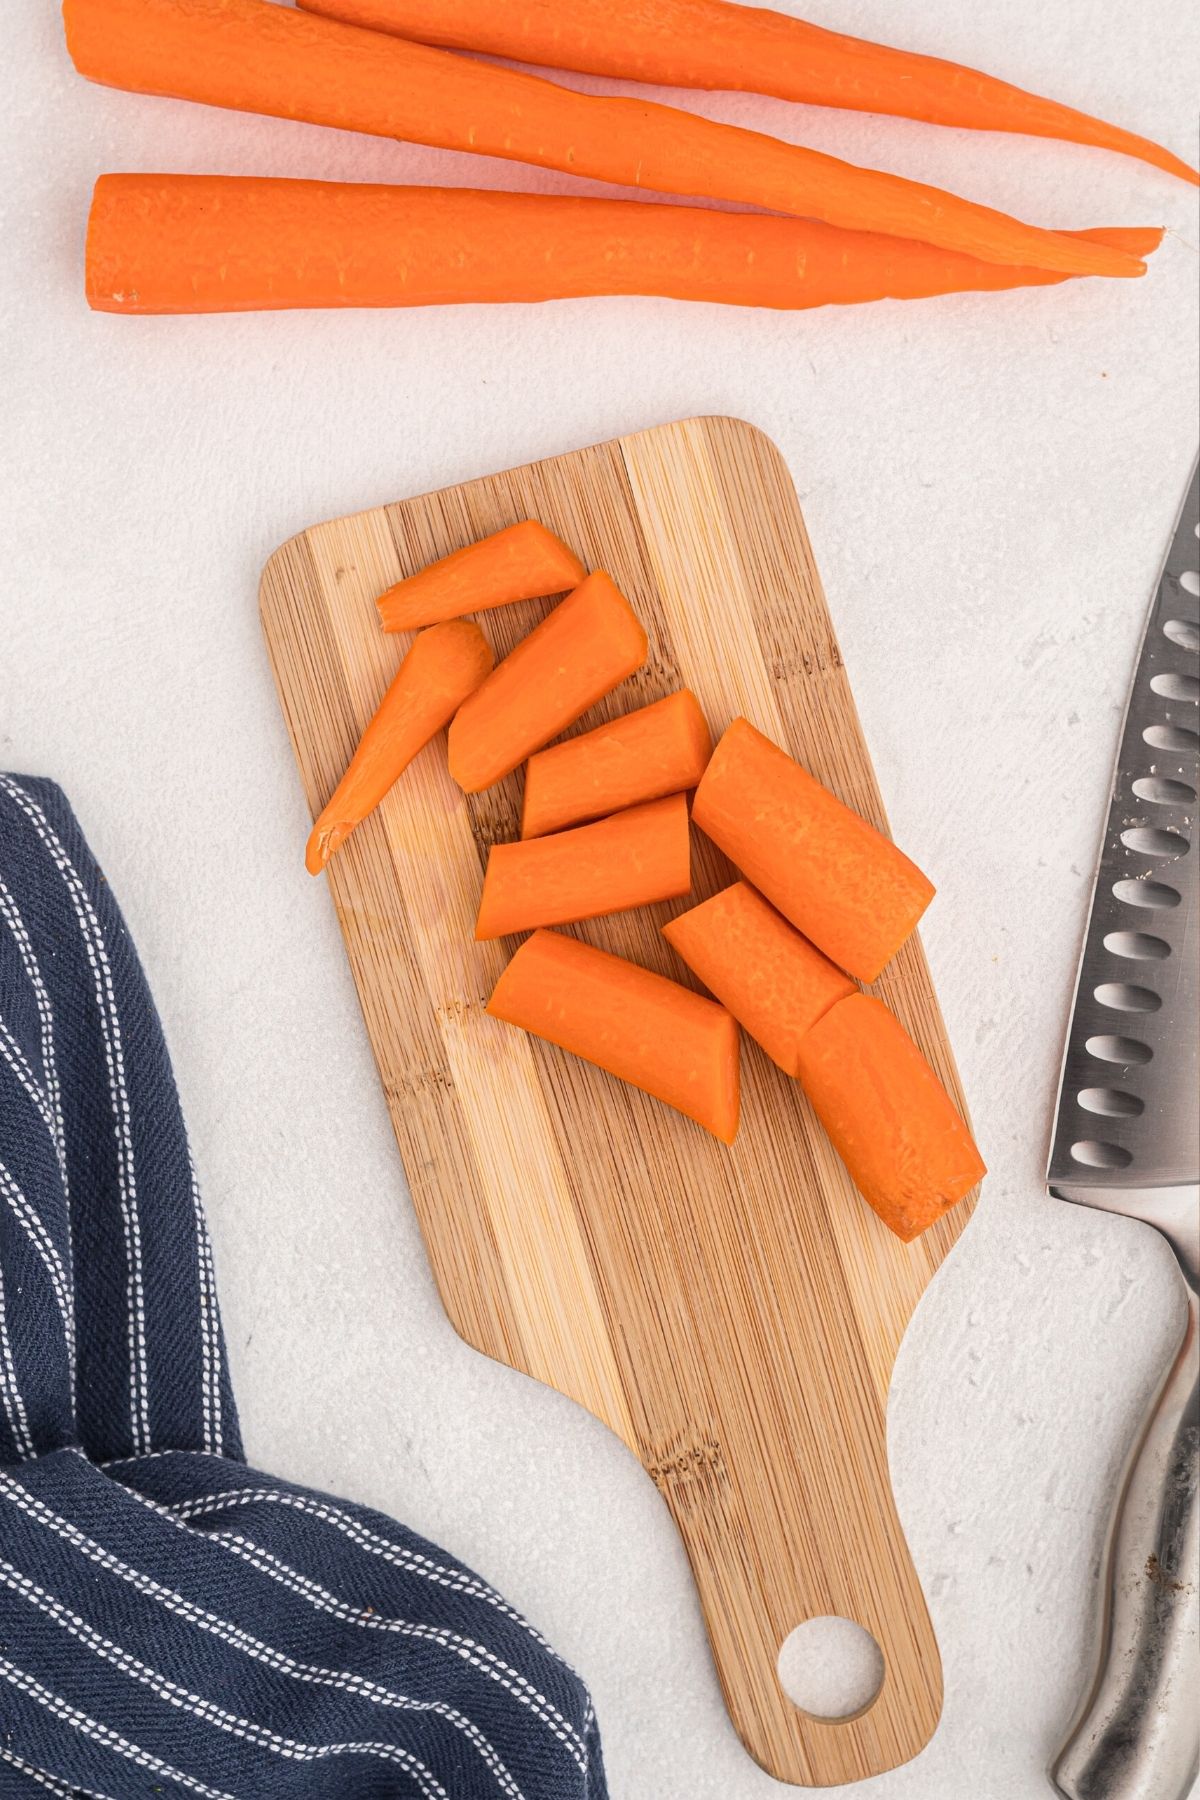 Carrots being sliced on a wooden cutting board with a knifr